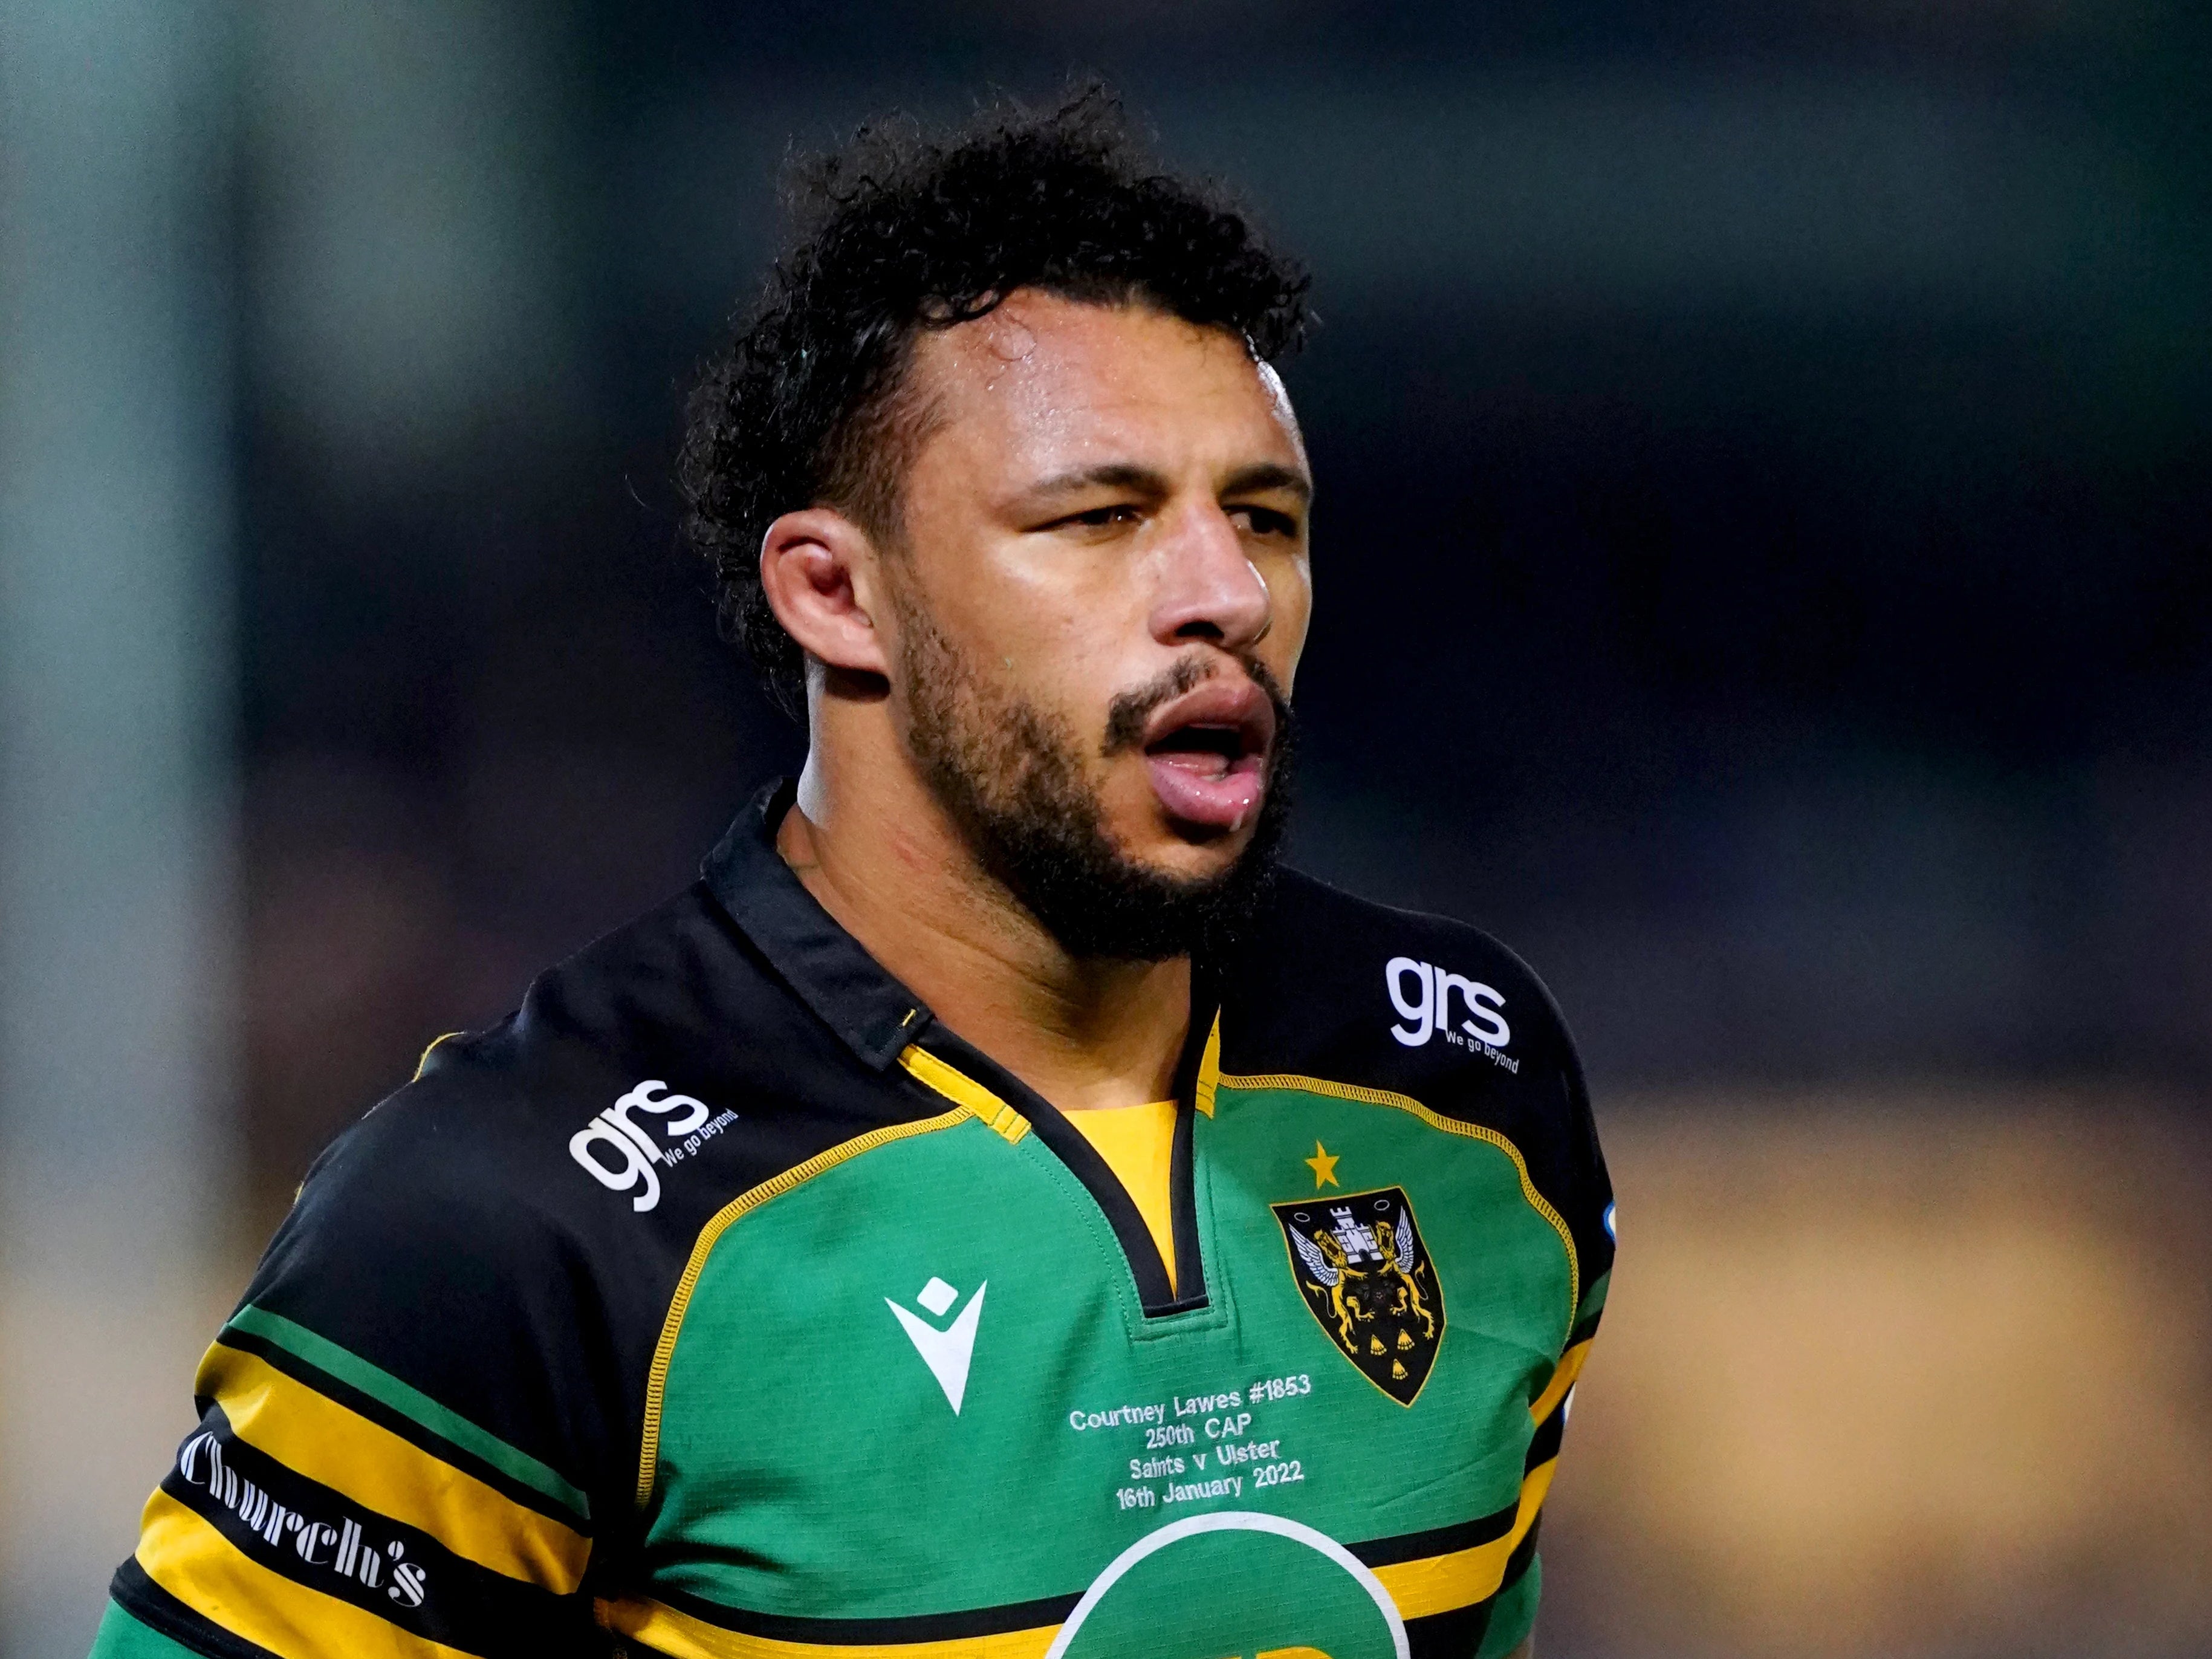 Northampton flanker Courtney Lawes is recovering from a nasty injury to his left hand (David Davies/PA)